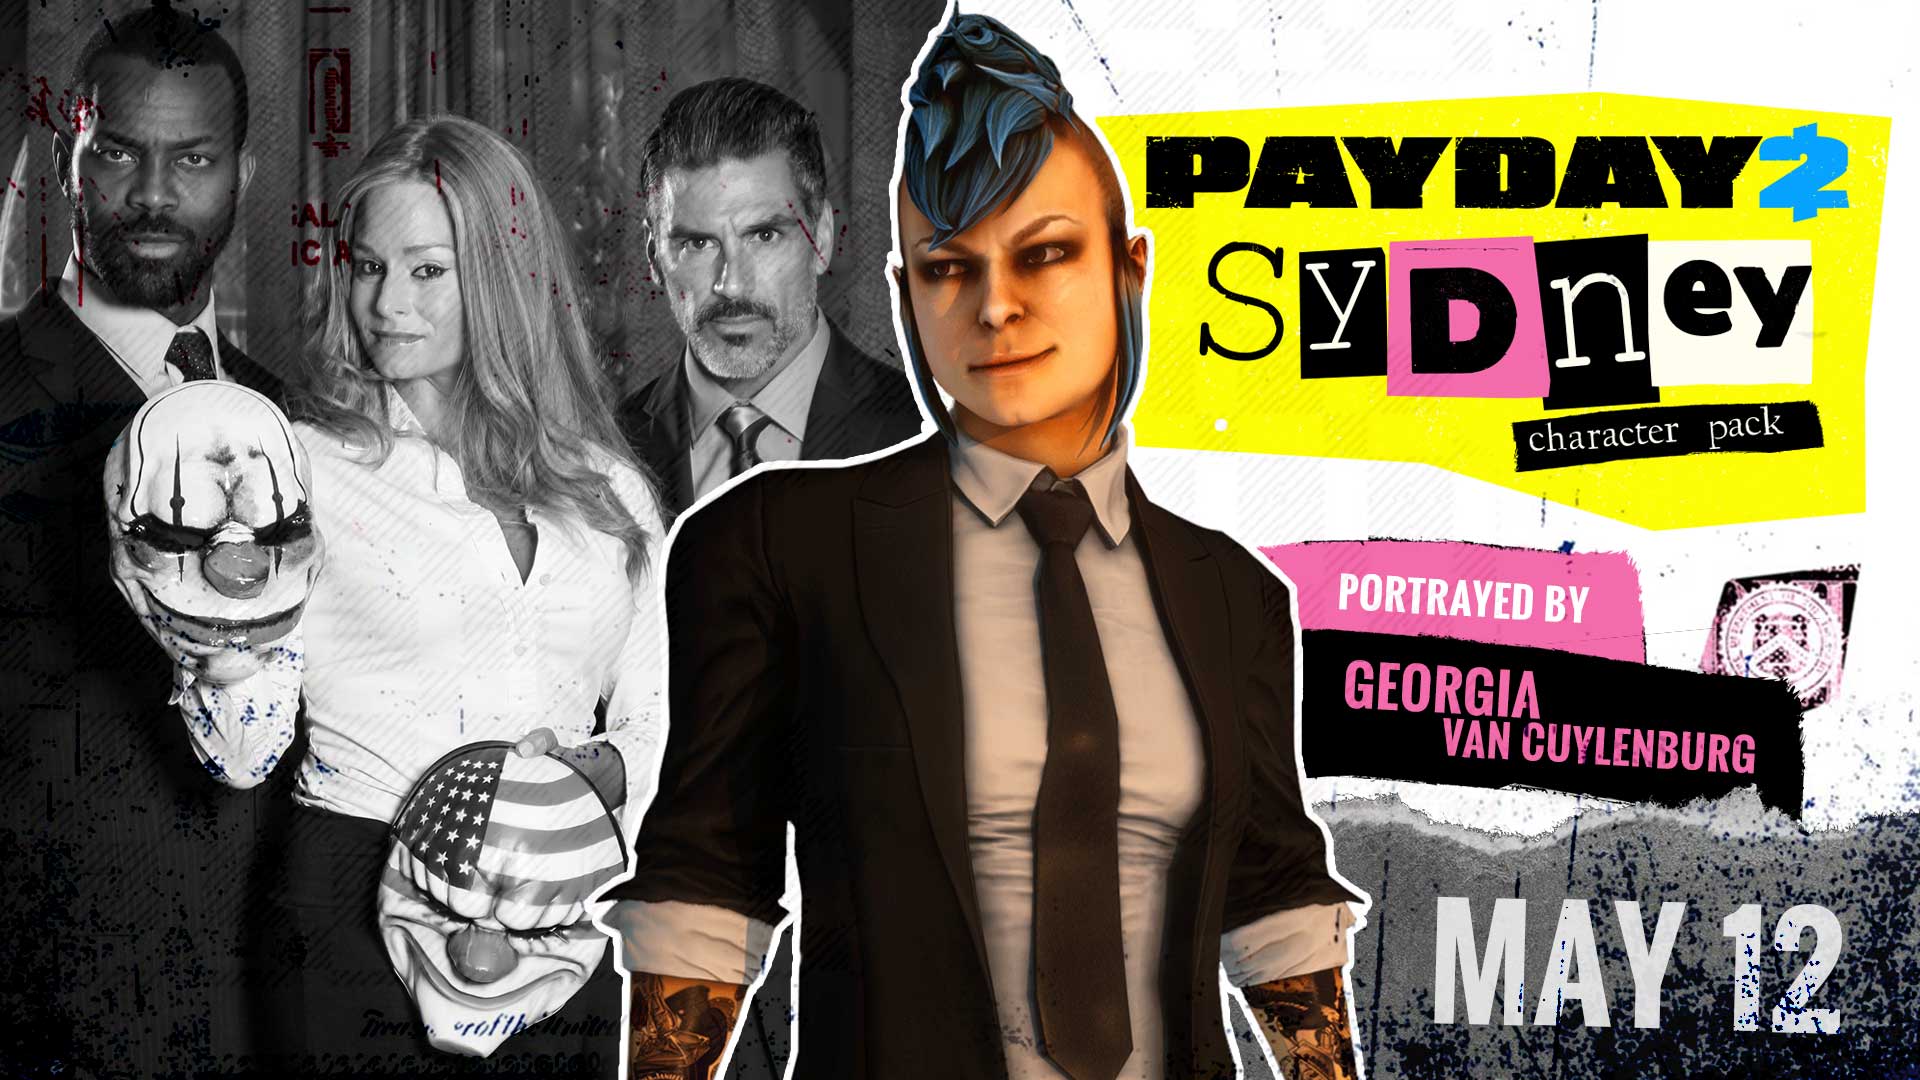 Sydney character payday 2 фото 89